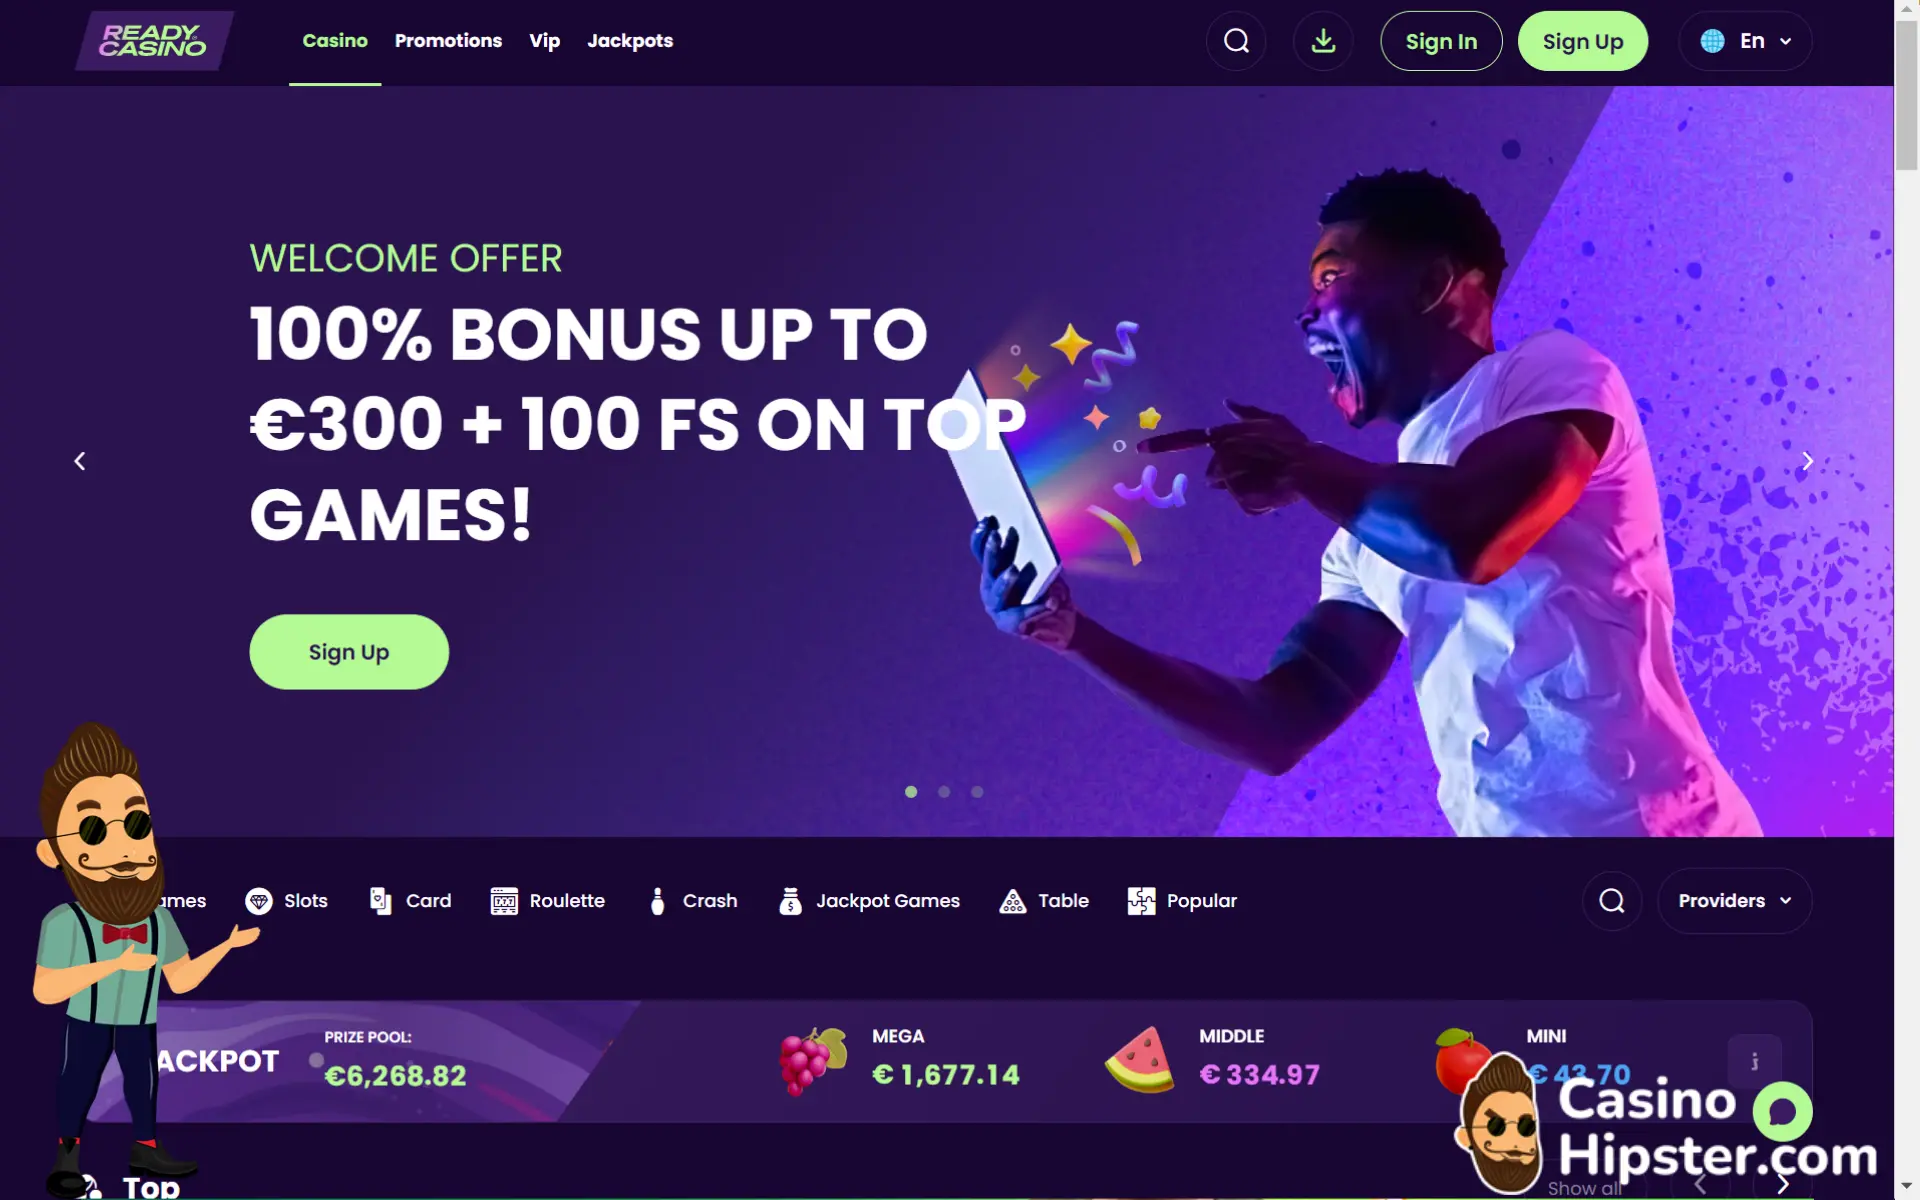 Ready Casino Review